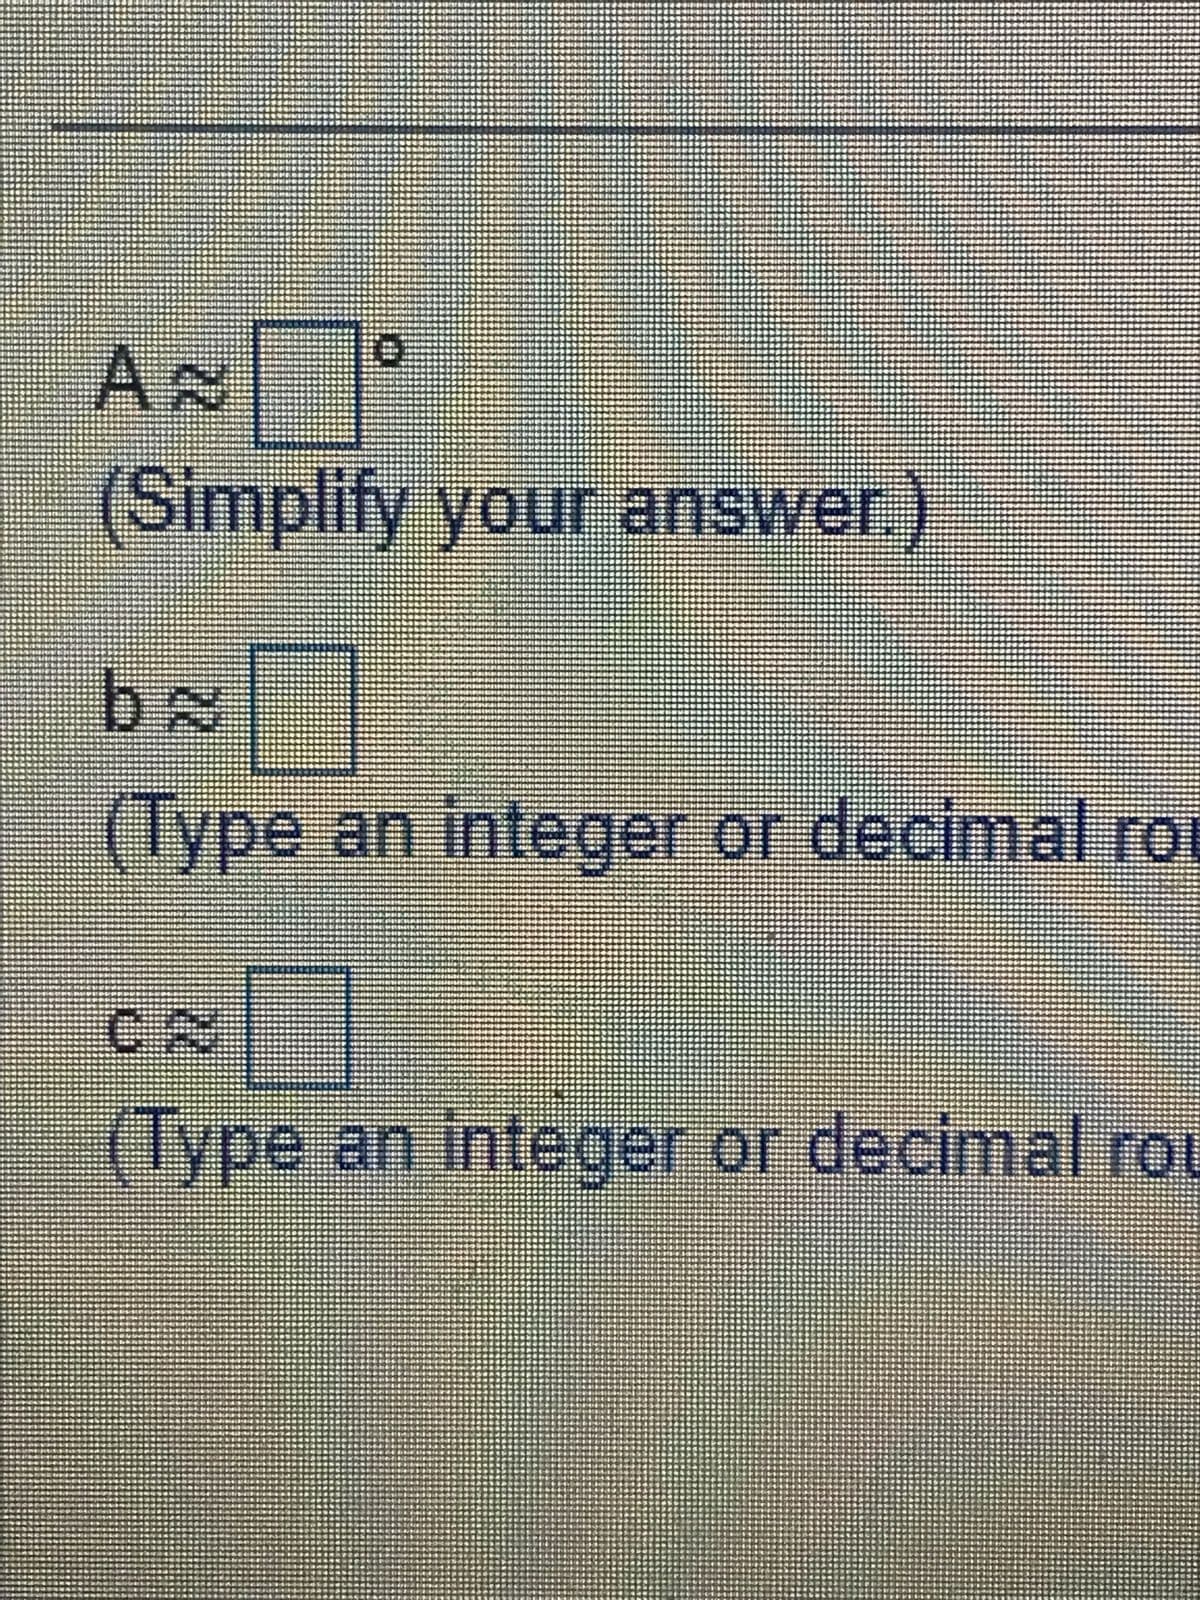 E
As
(Simplify your answer.)
b~||
(Type an integer or decimal ro
22
CA
N
(Type an integer or decimal rou